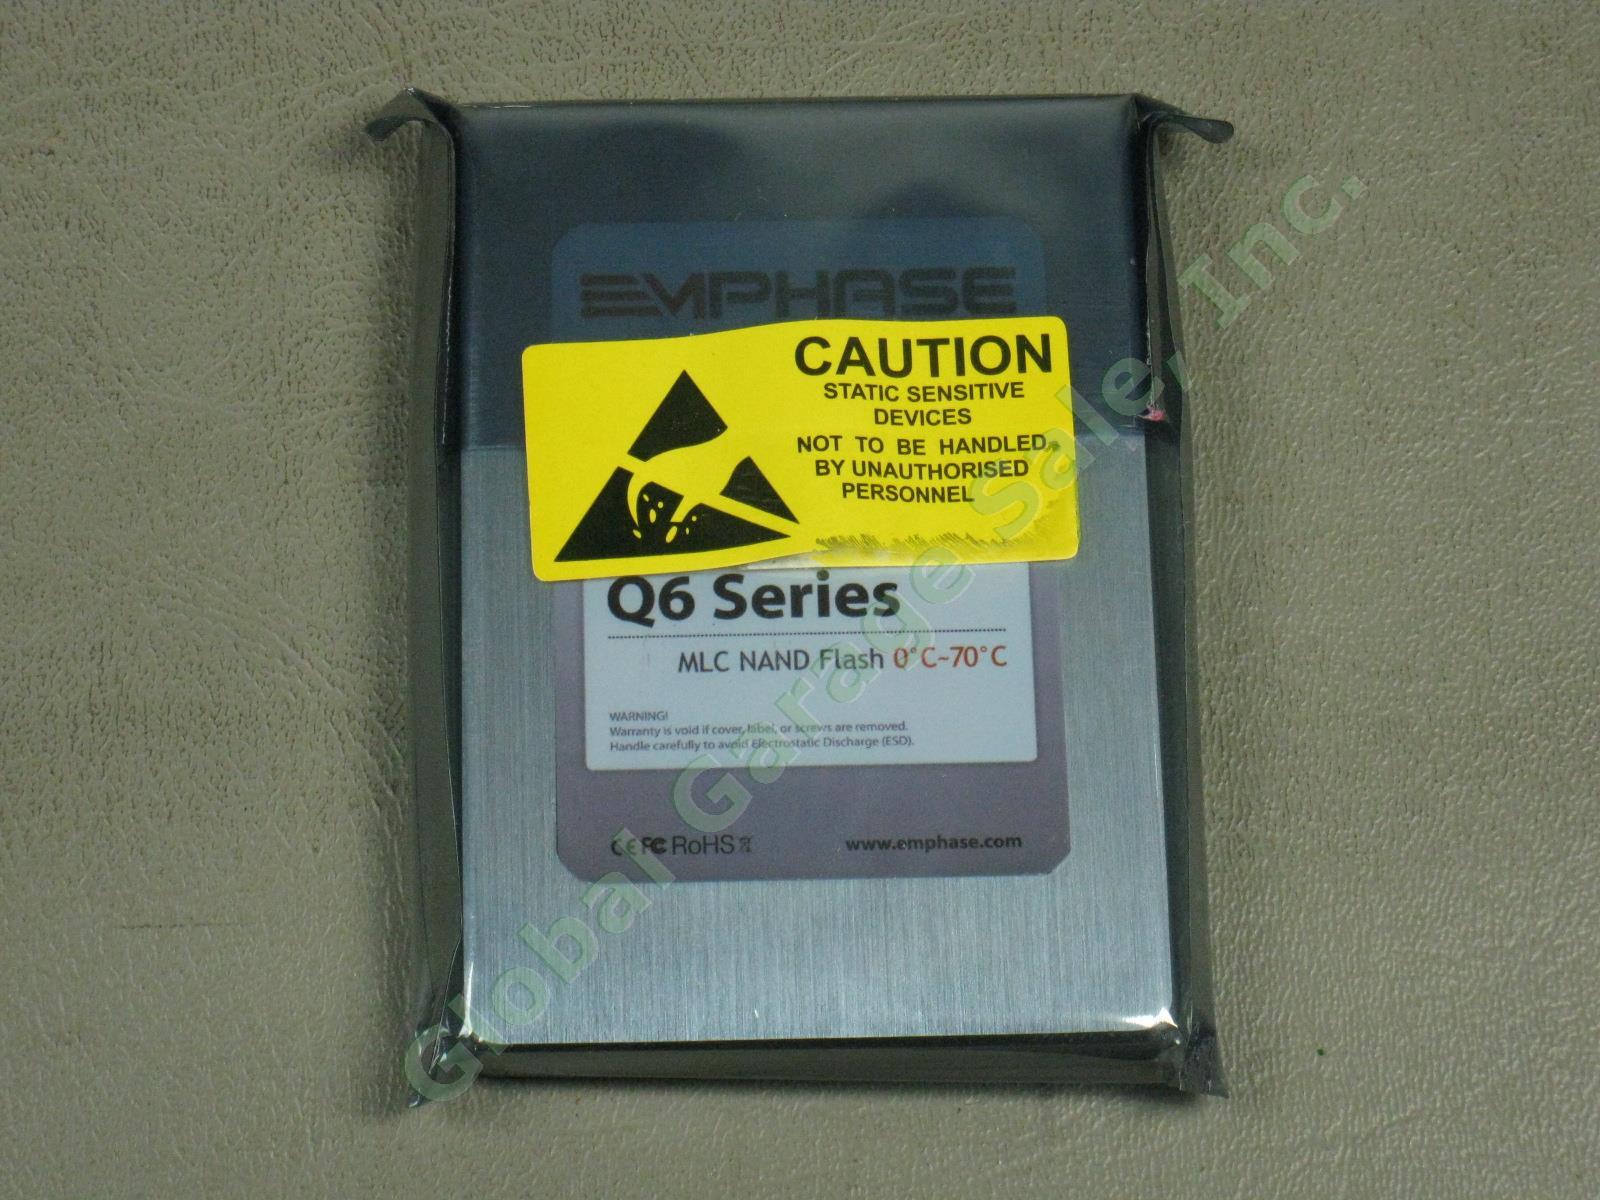 10 Emphase Q6 60GB SSD SATA3 Industrial 2.5 MLC NAND Flash Solid State Drive Lot 1